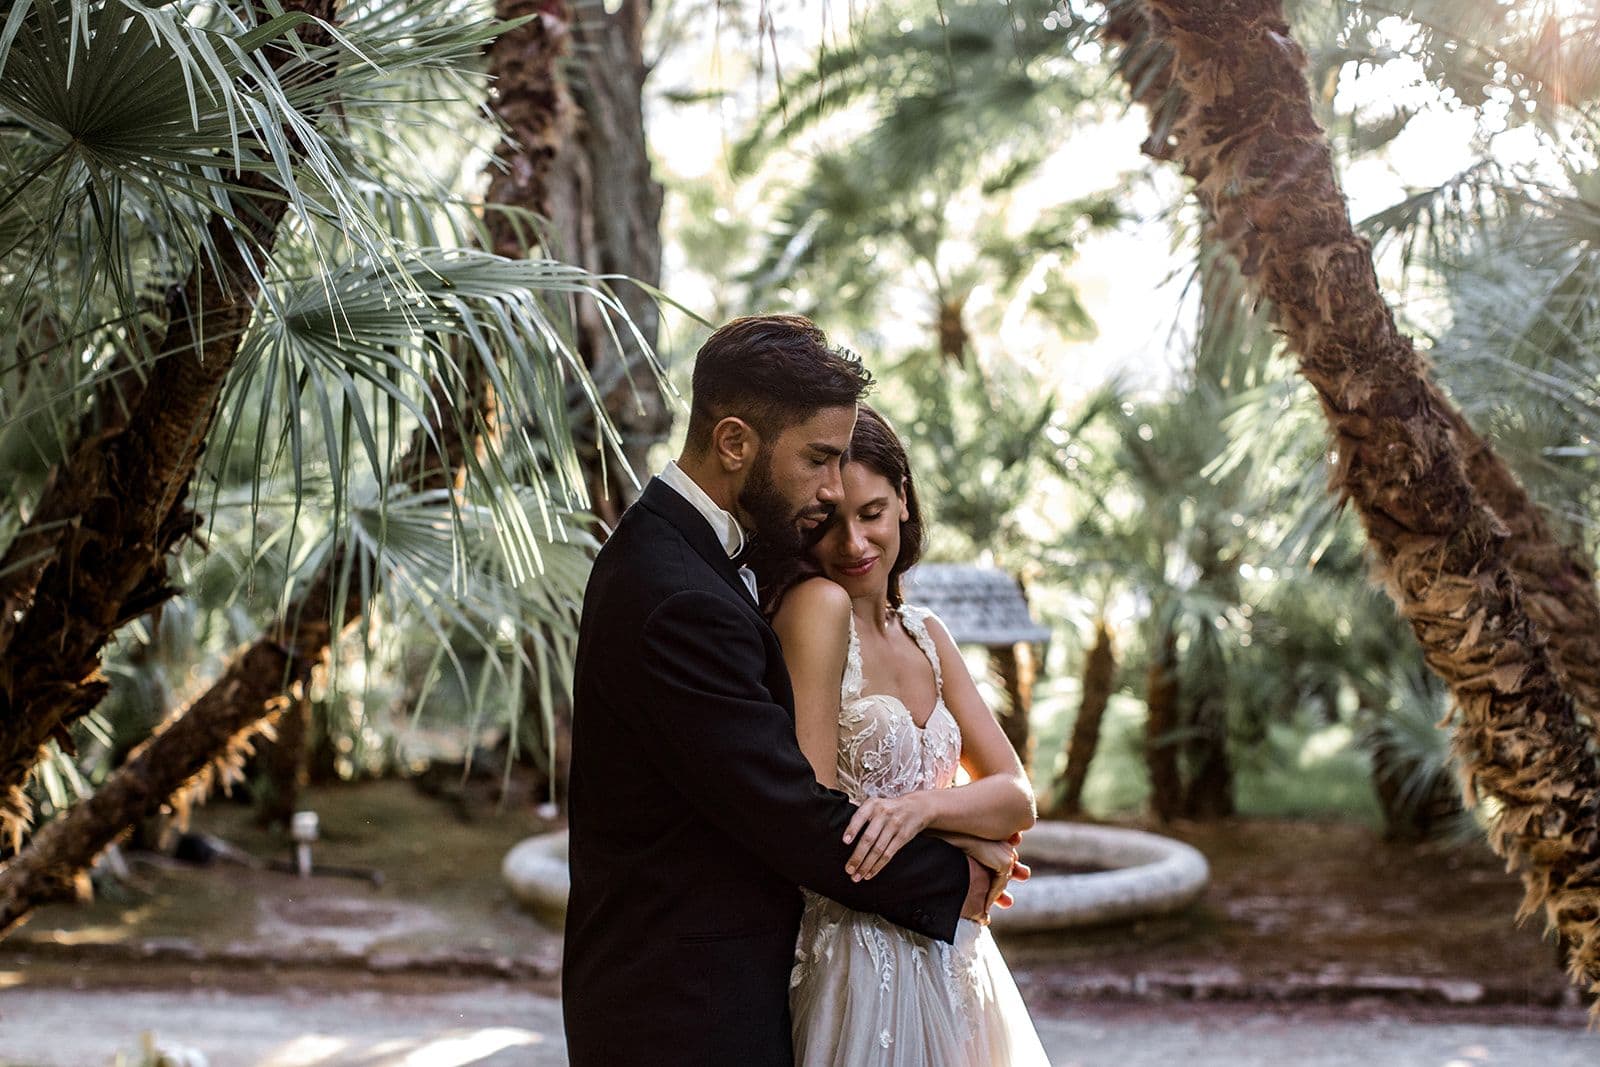 Bride and groom embrace in the tropical gardens of Villa Astor in Sorrento Italy